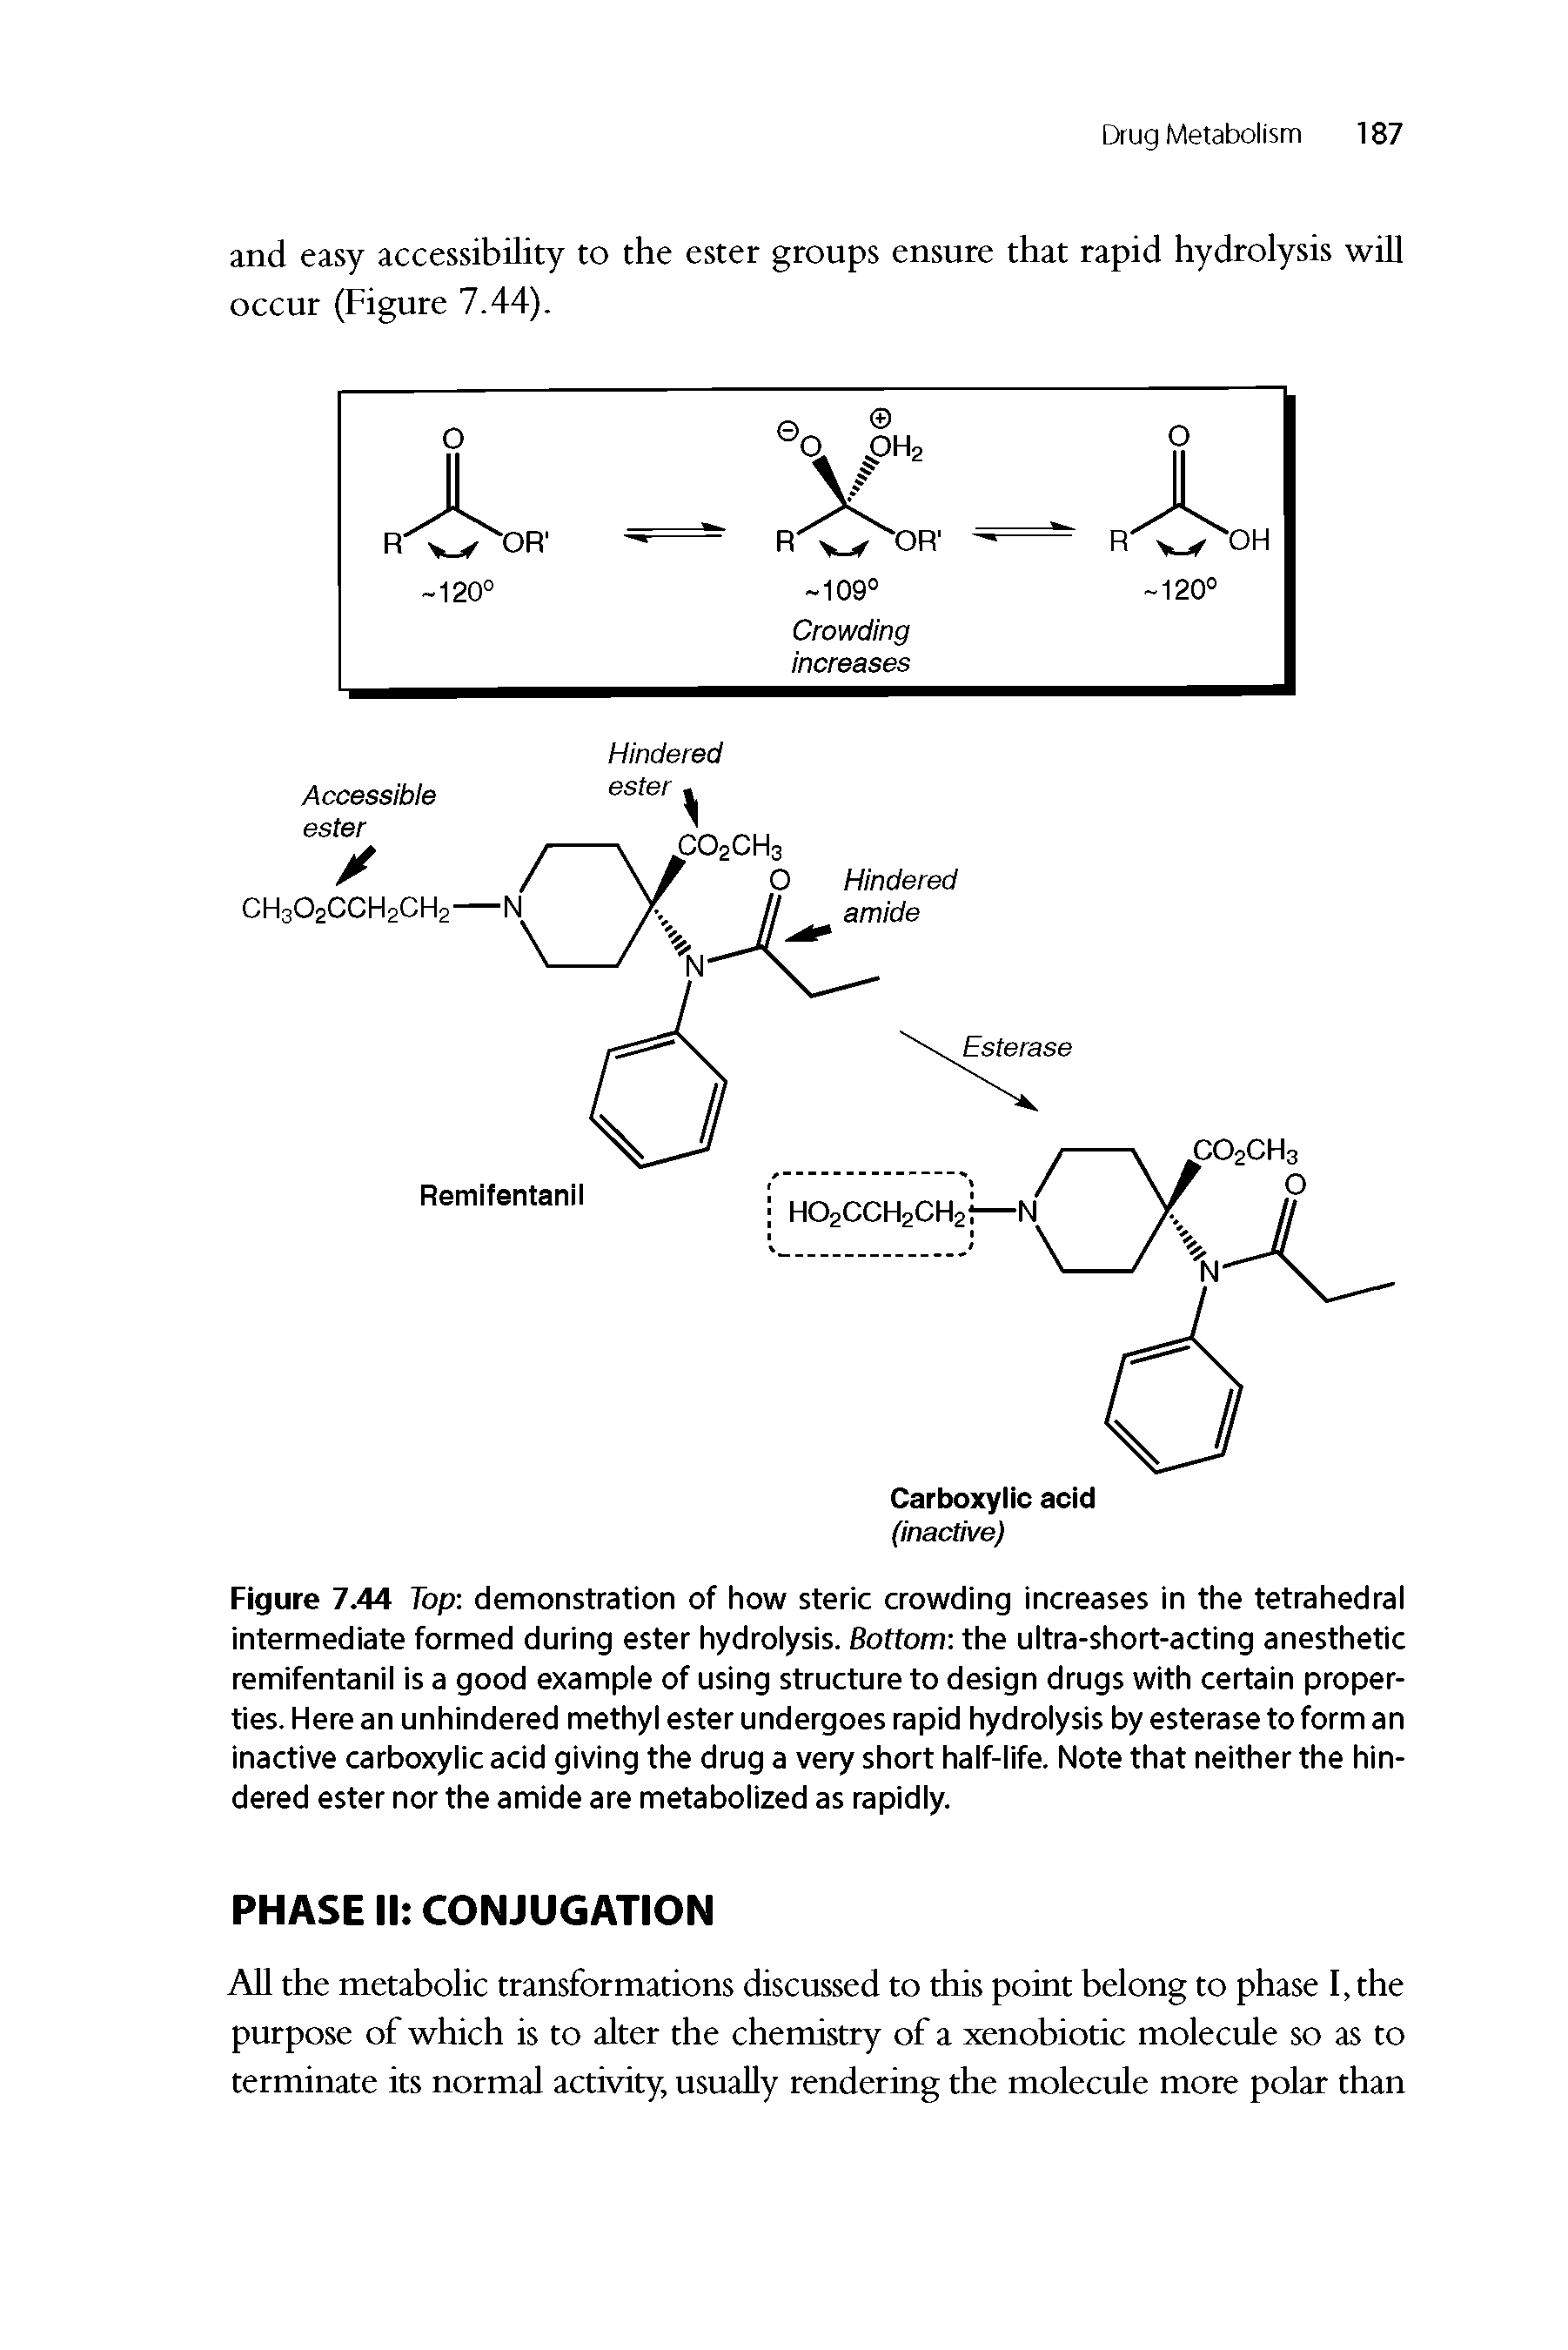 Figure 7.44 Top demonstration of how steric crowding increases in the tetrahedral intermediate formed during ester hydrolysis. Bottom the ultra-short-acting anesthetic remifentanil is a good example of using structure to design drugs with certain properties. Here an unhindered methyl ester undergoes rapid hydrolysis by esterase to form an inactive carboxylic acid giving the drug a very short half-life. Note that neither the hindered ester nor the amide are metabolized as rapidly.